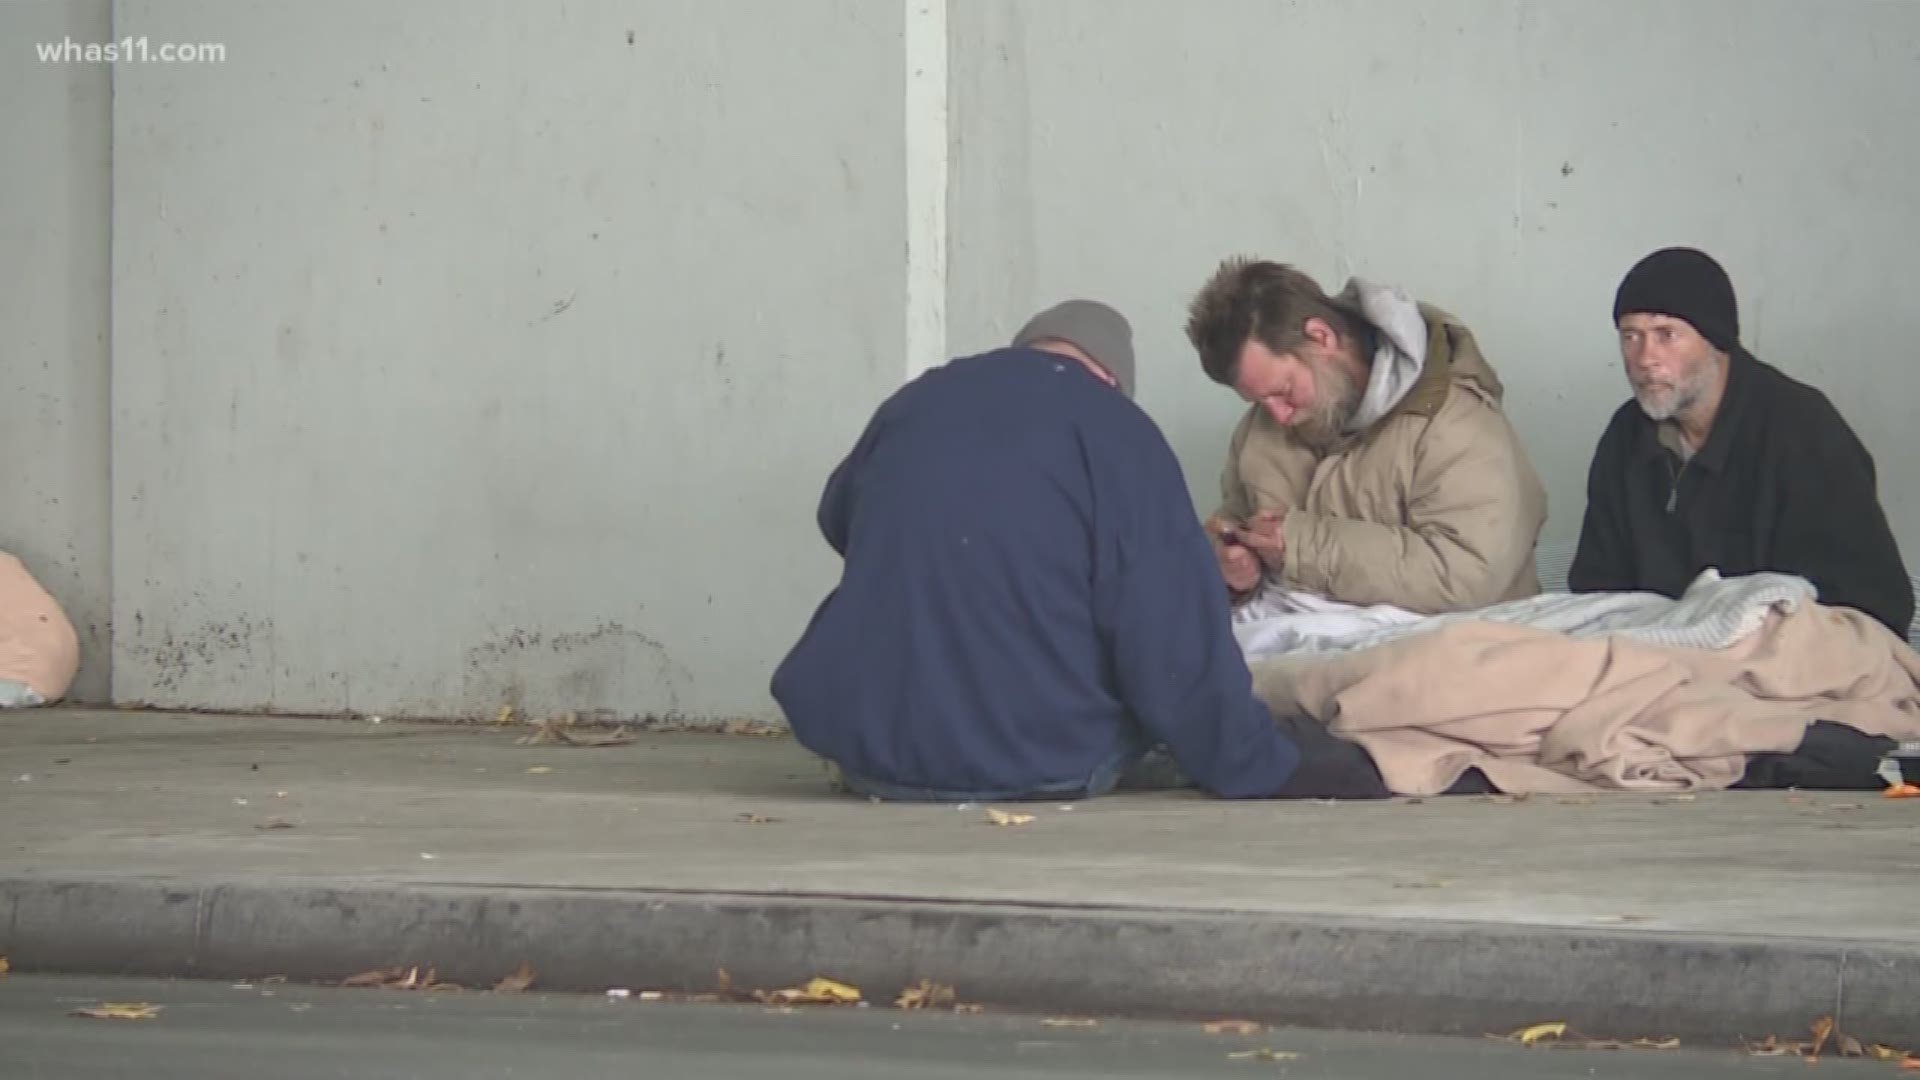 Those frigid temperatures forcing homeless shelters to go into white flag status tonight and many nights to come.